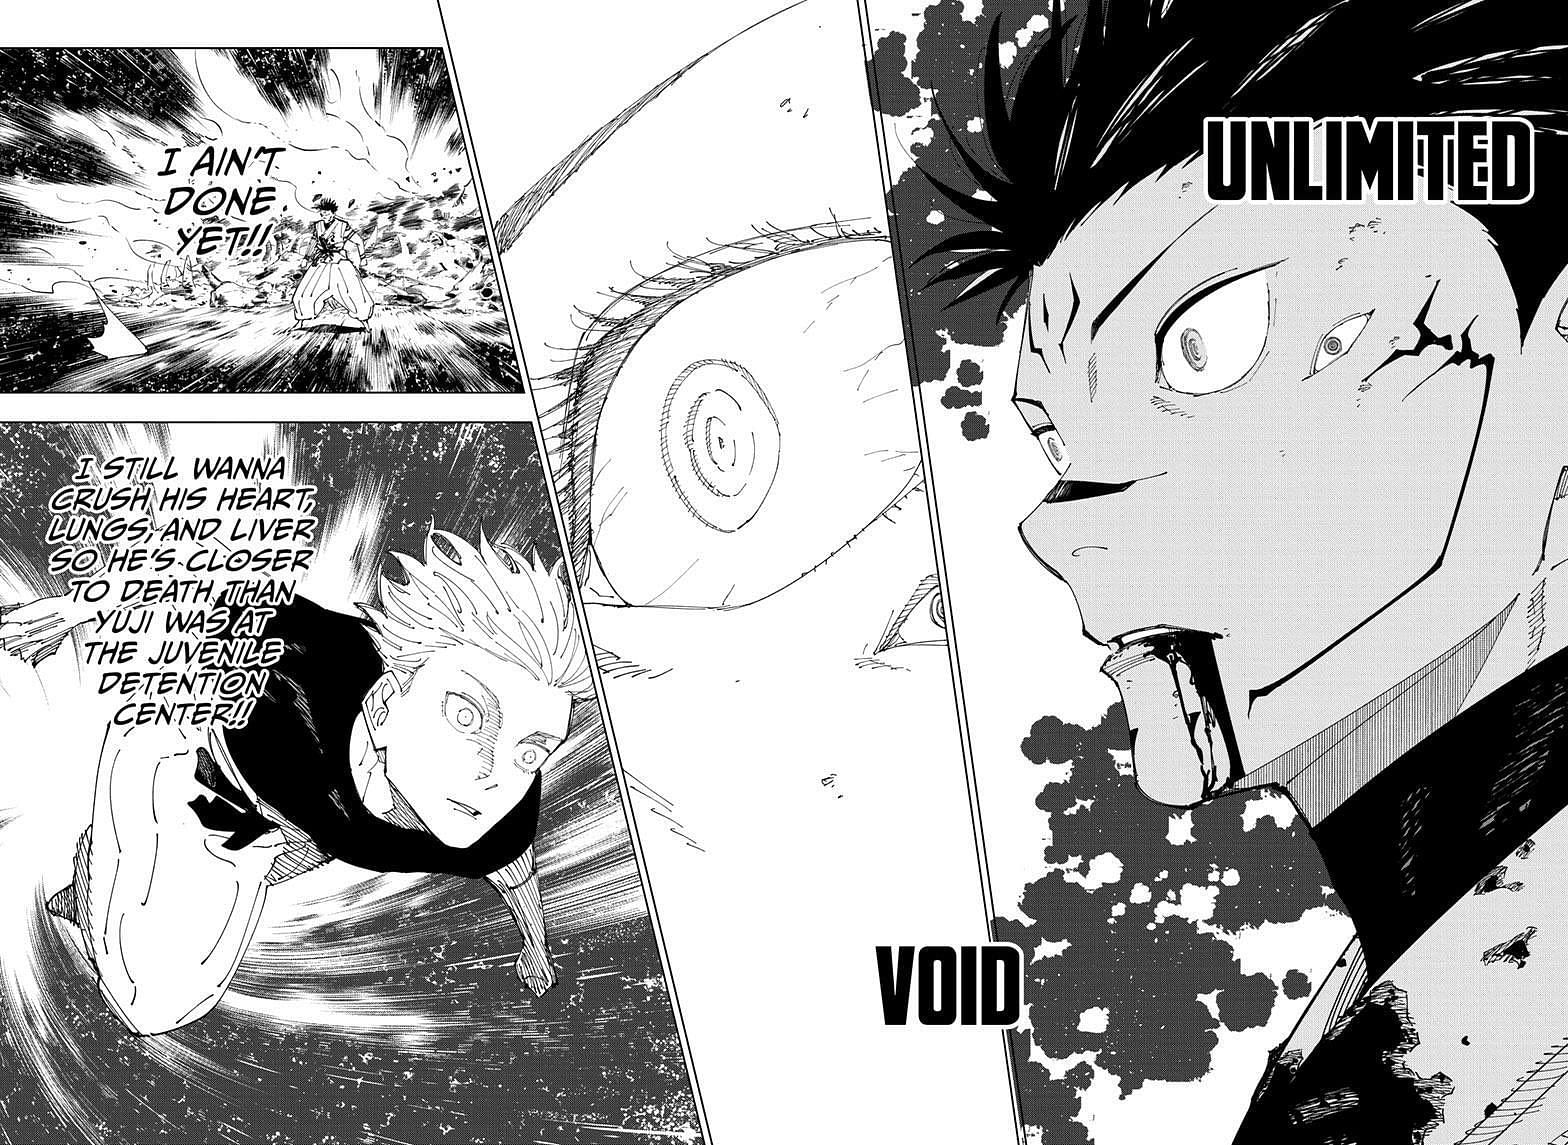 Jujutsu Kaisen Chapter 230 spoilers and raw scans: Gojo forced to attack Megumi as Sukuna uses Mahoraga in a way no one expected - Sportskeeda